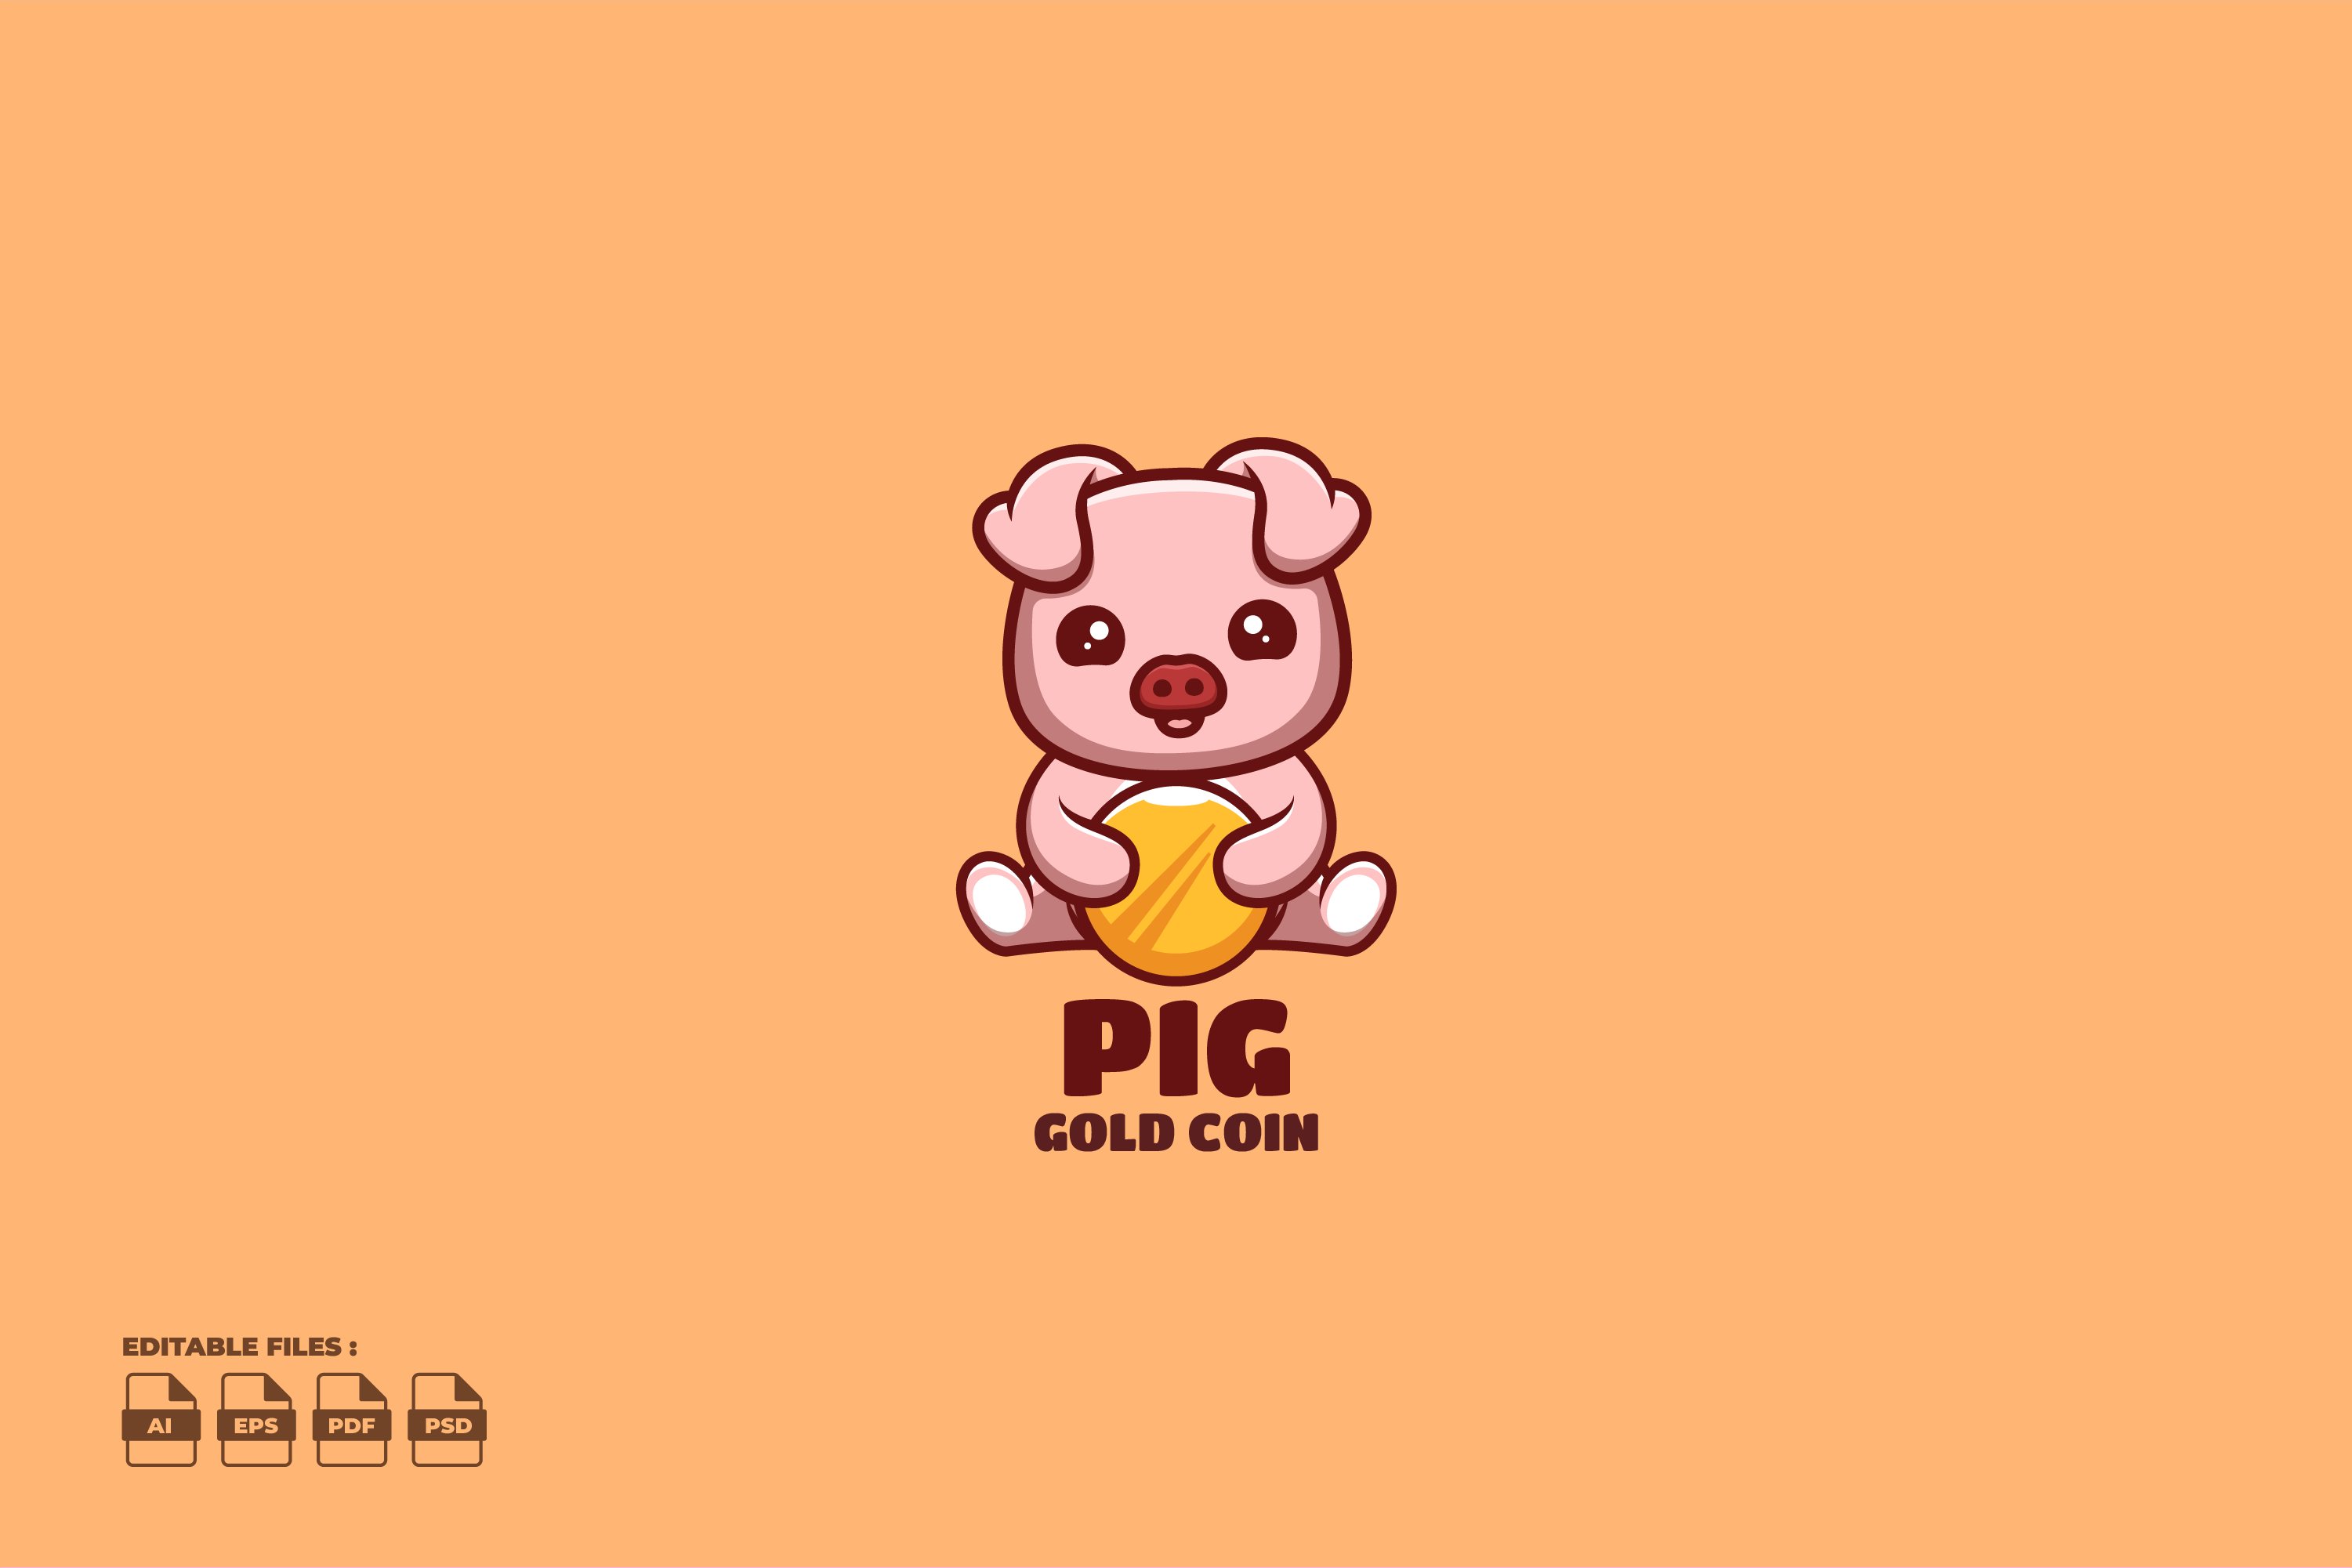 Gold Coin Pig Cute Mascot Logo cover image.